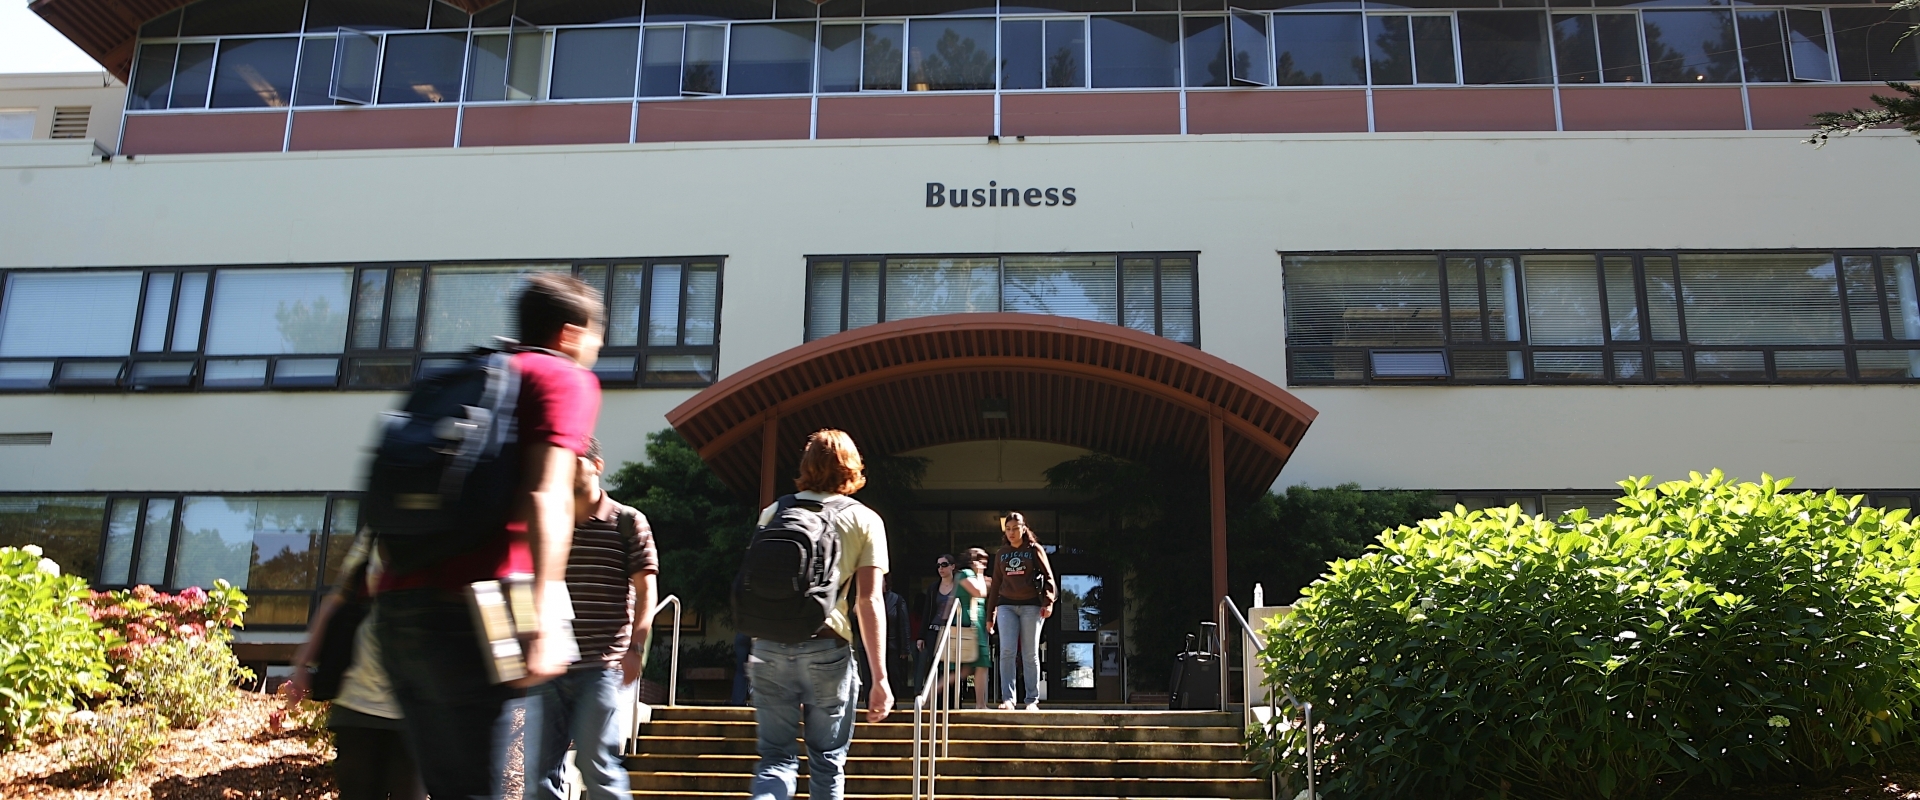 College of Business Building